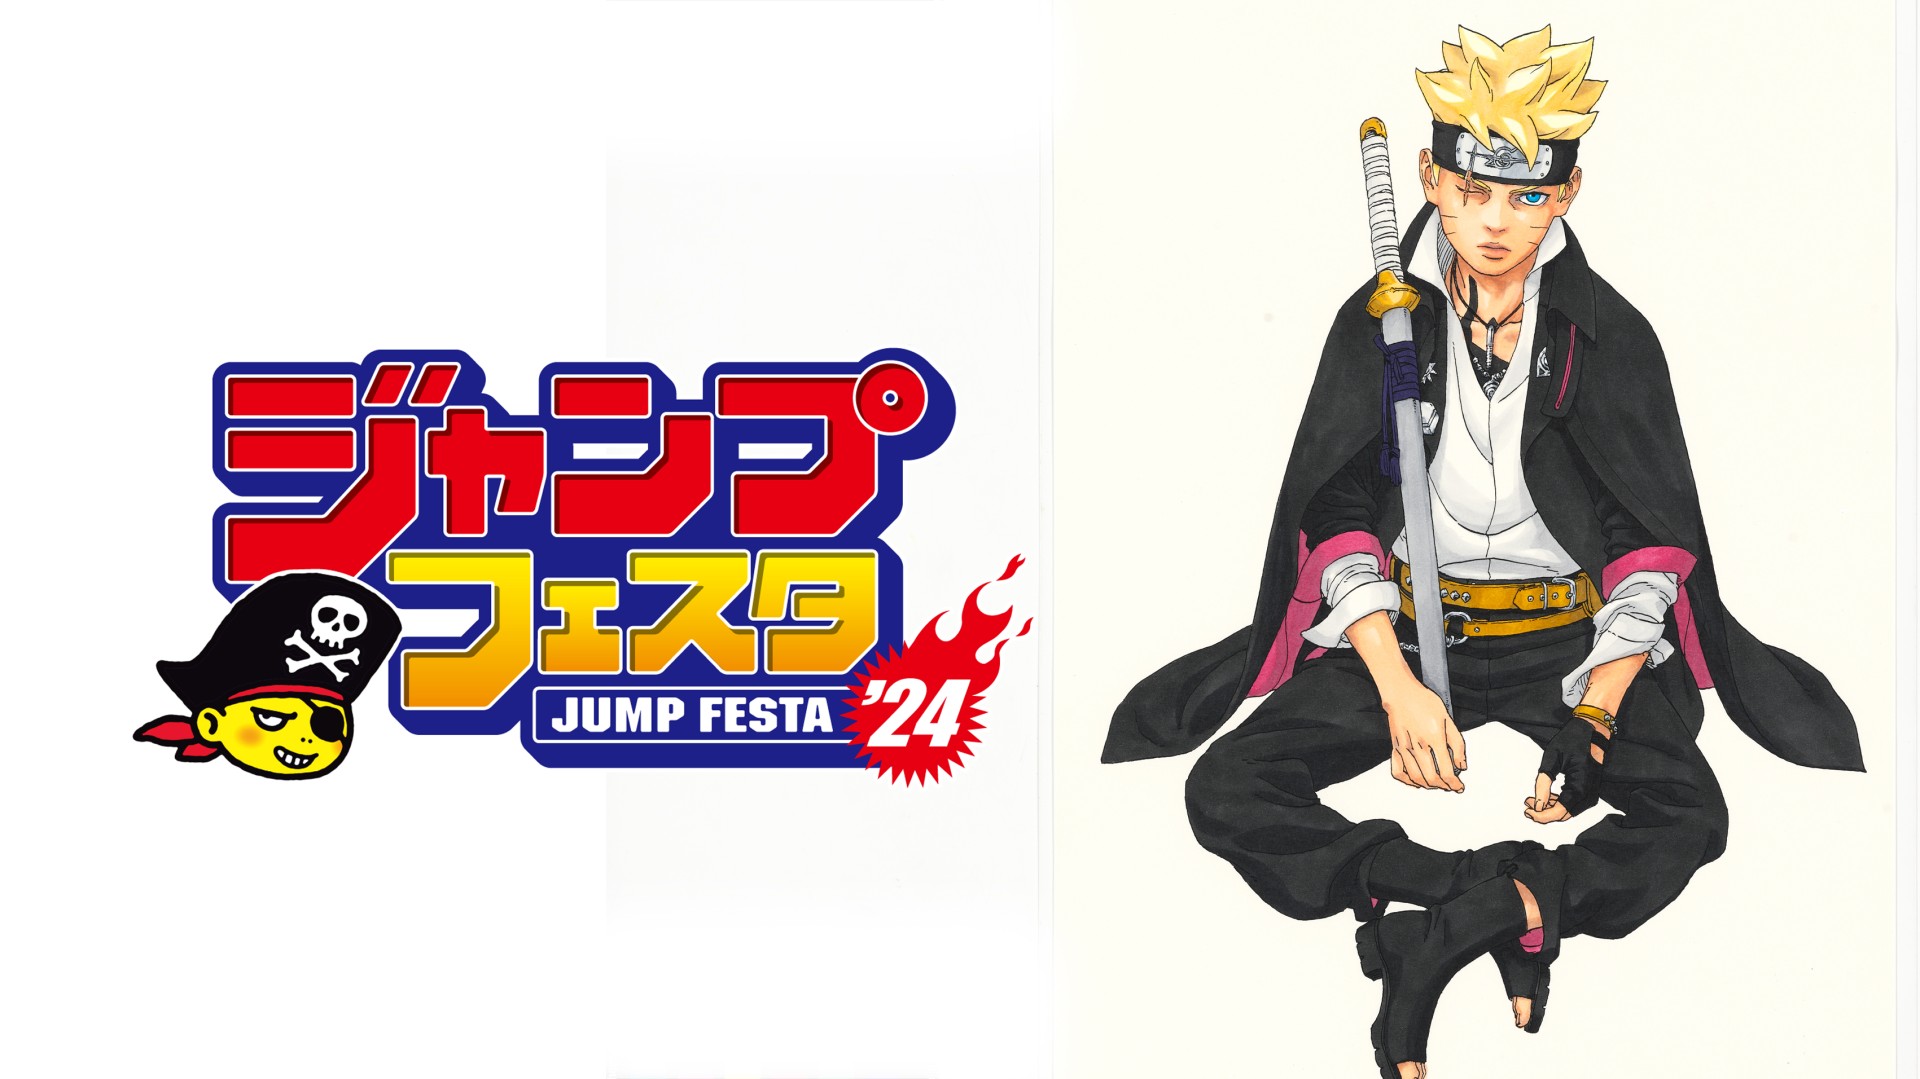 Coming This Weekend! Everything You Need to Know About Naruto & Boruto